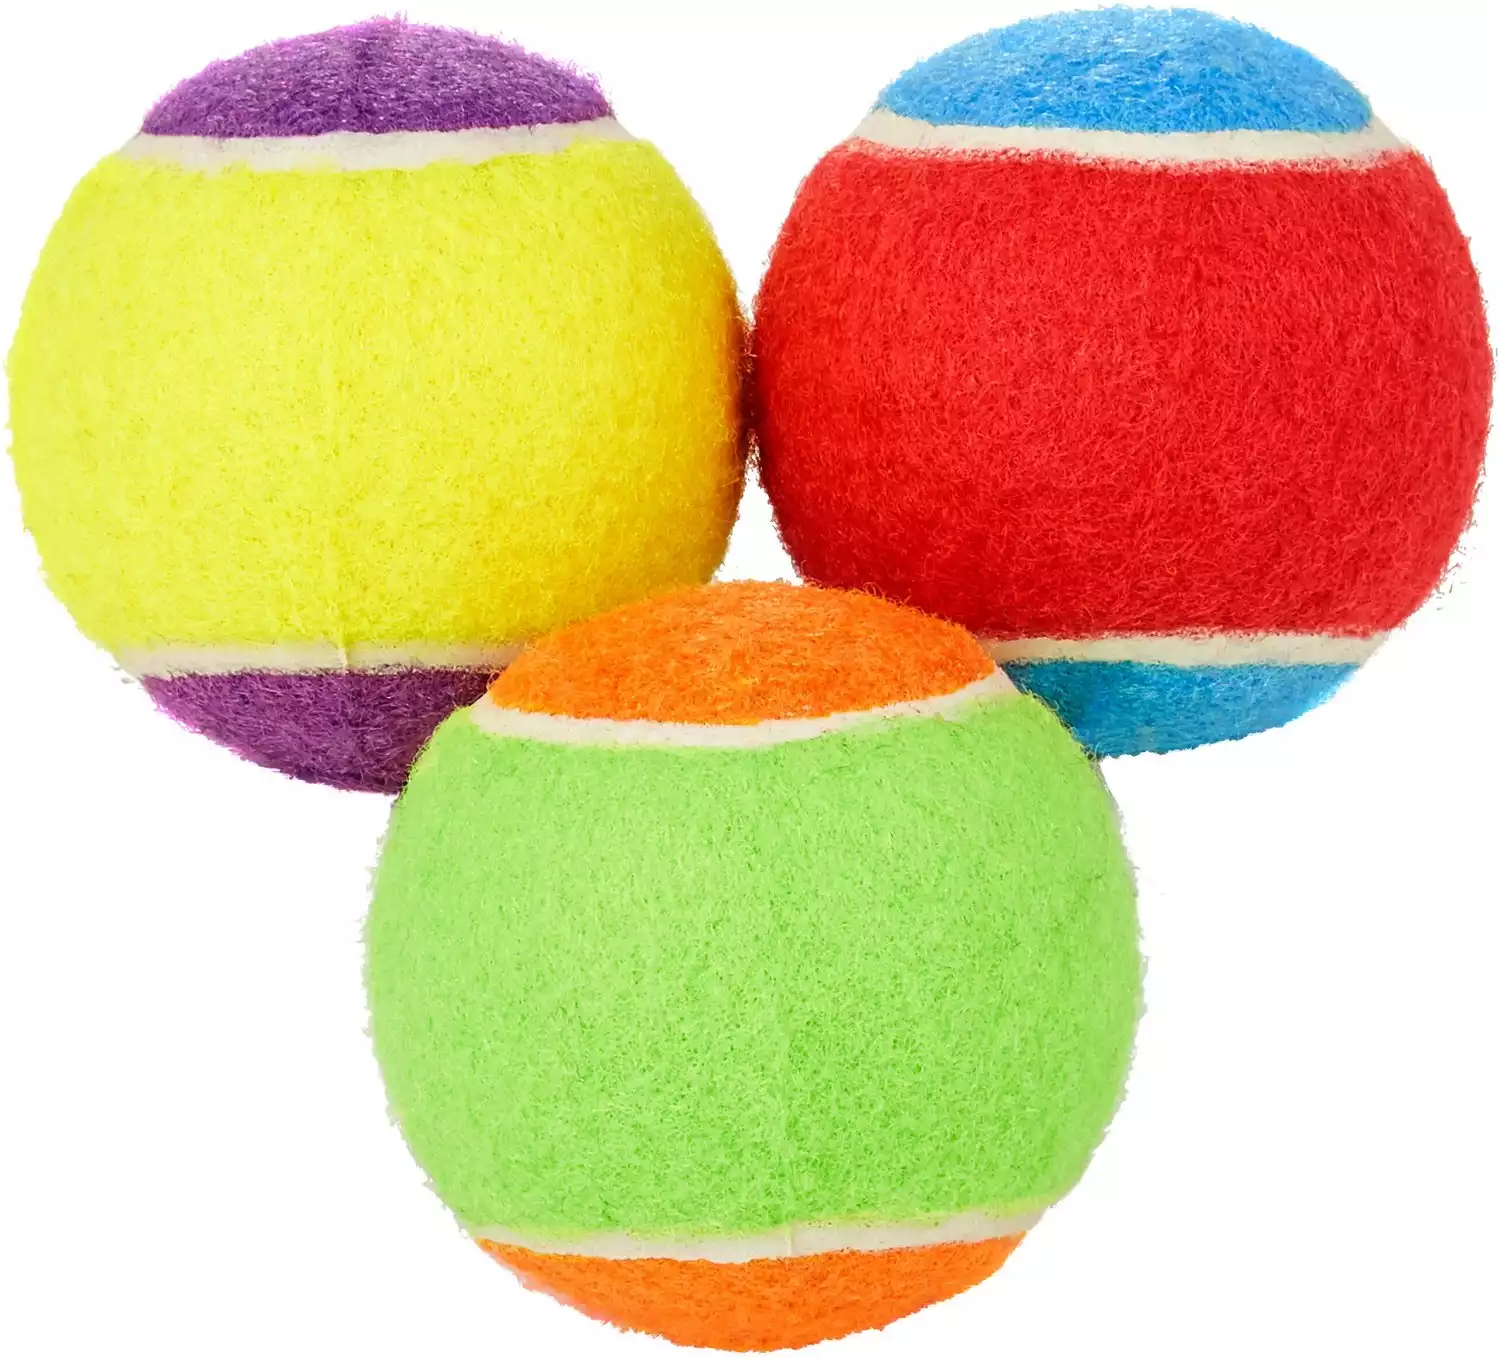 Frisco Fetch Squeaking Colorful Tennis Ball Dog Toy